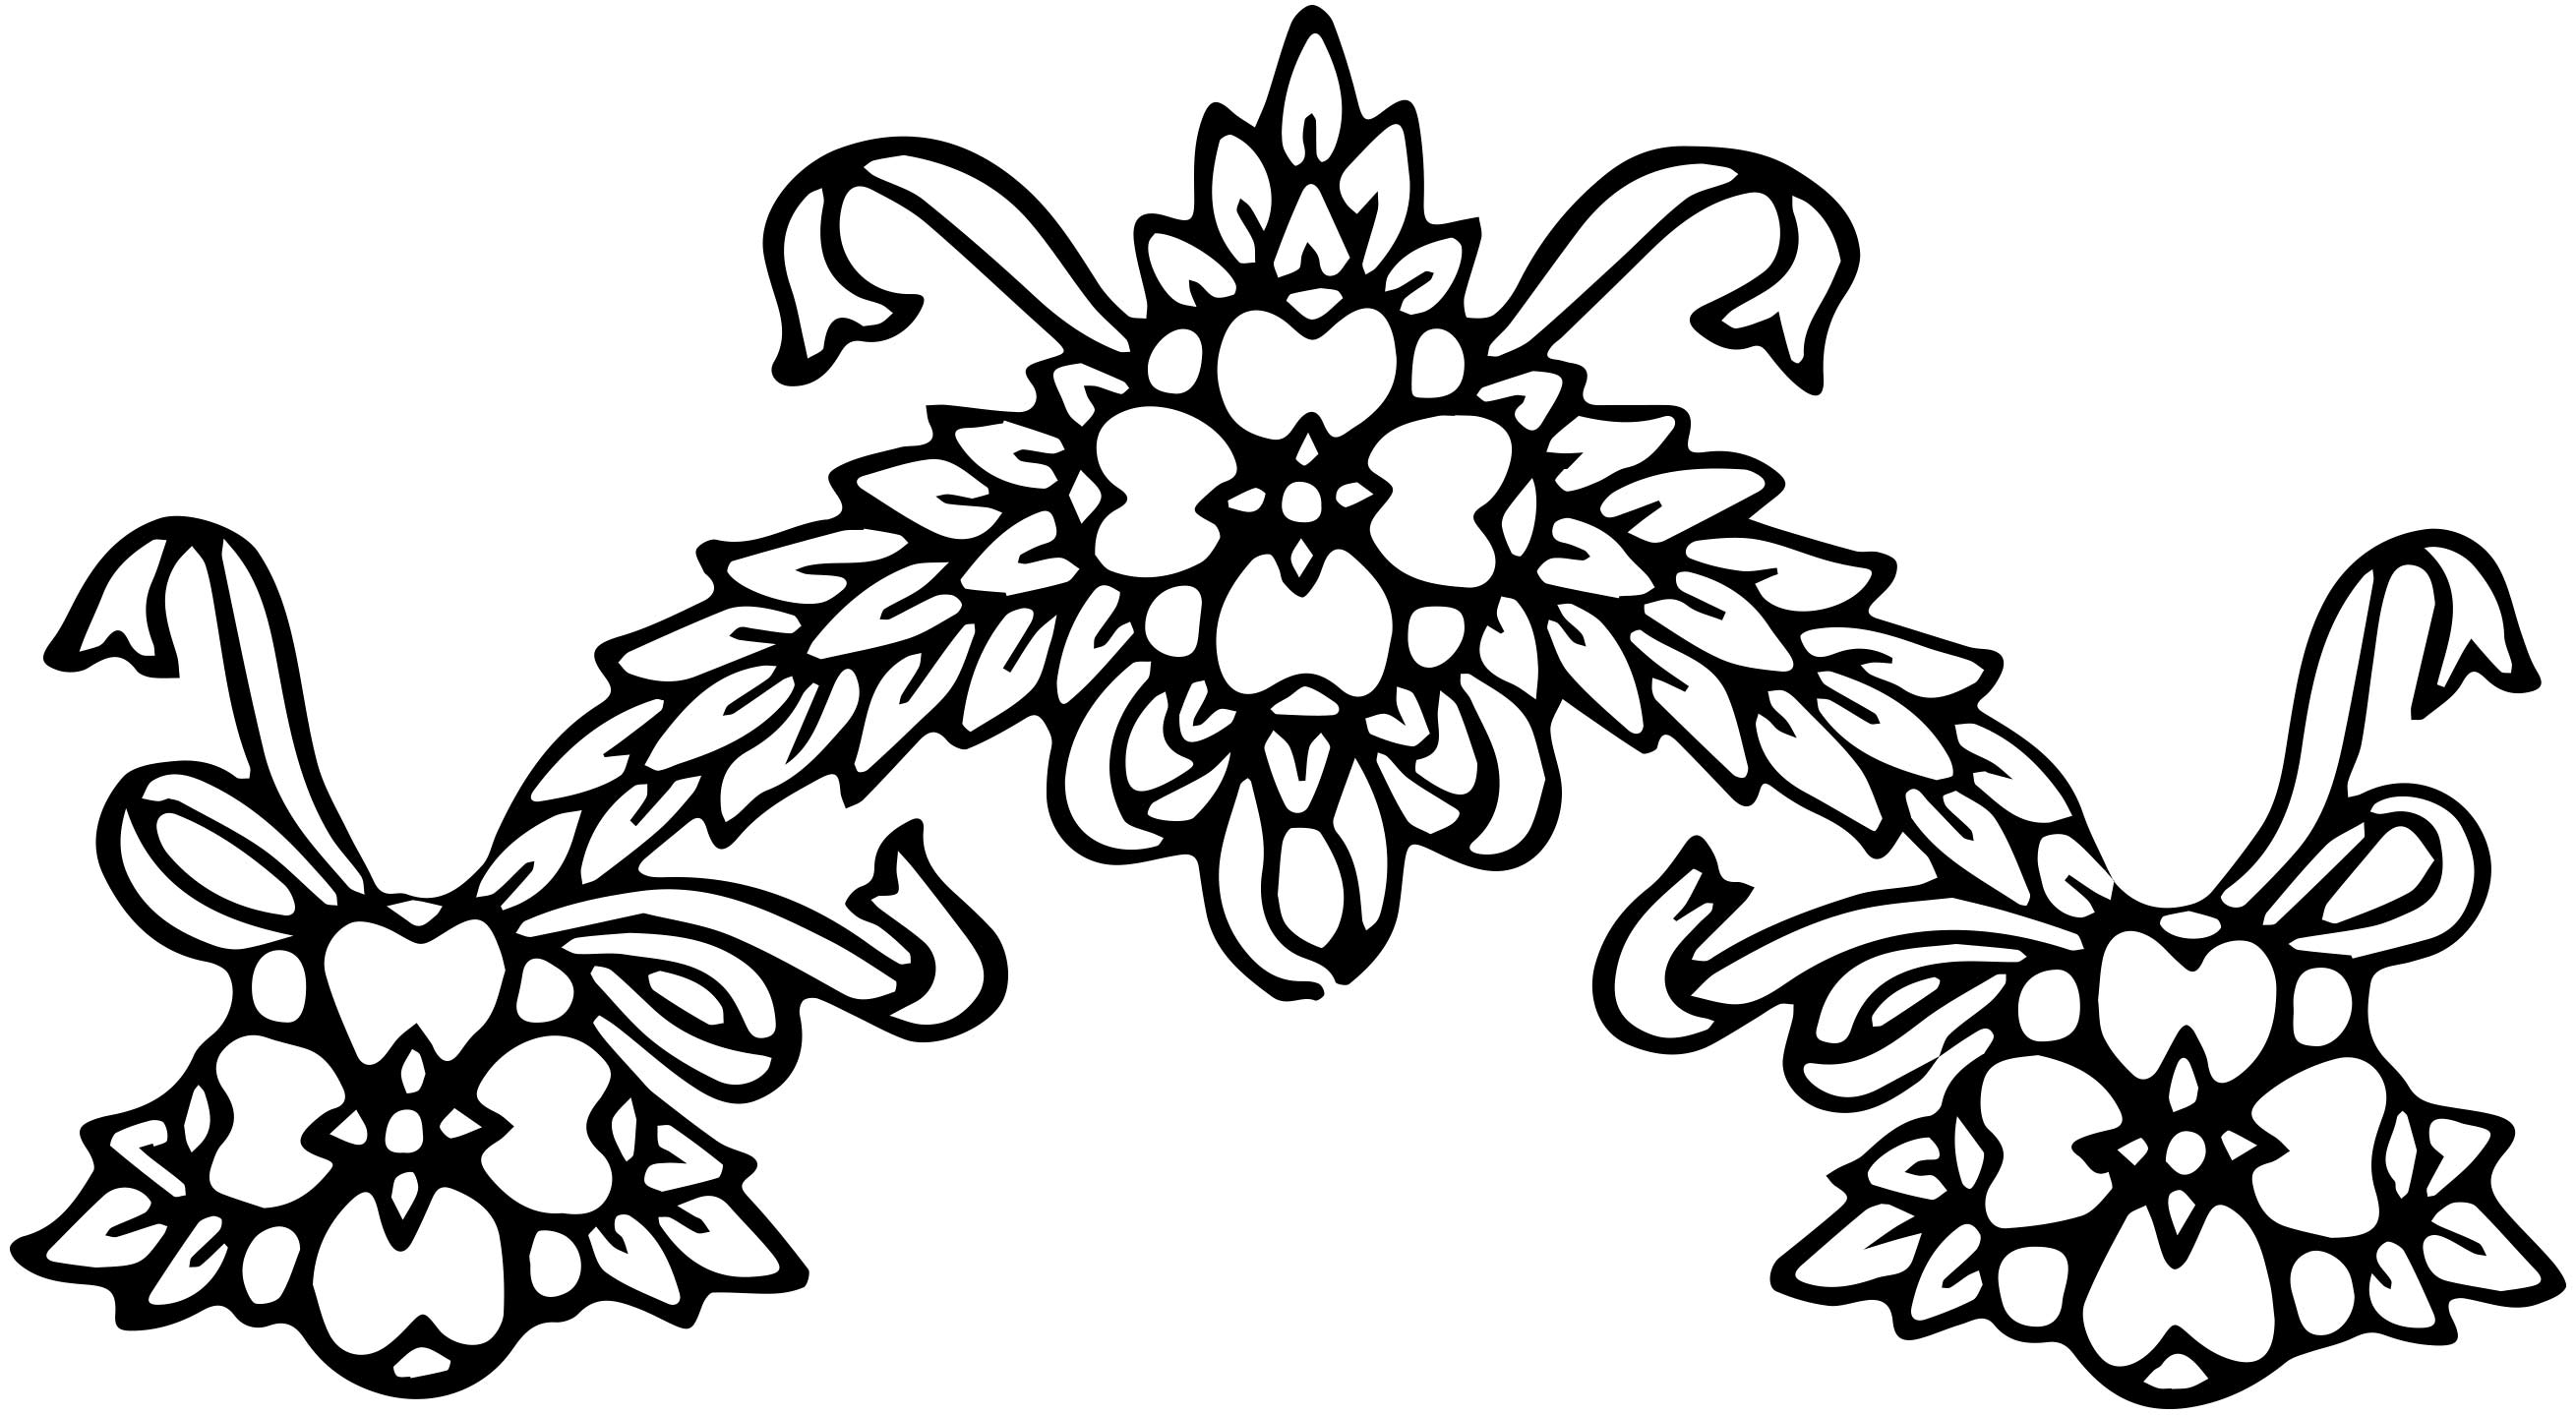 Free clipart funeral flowers 